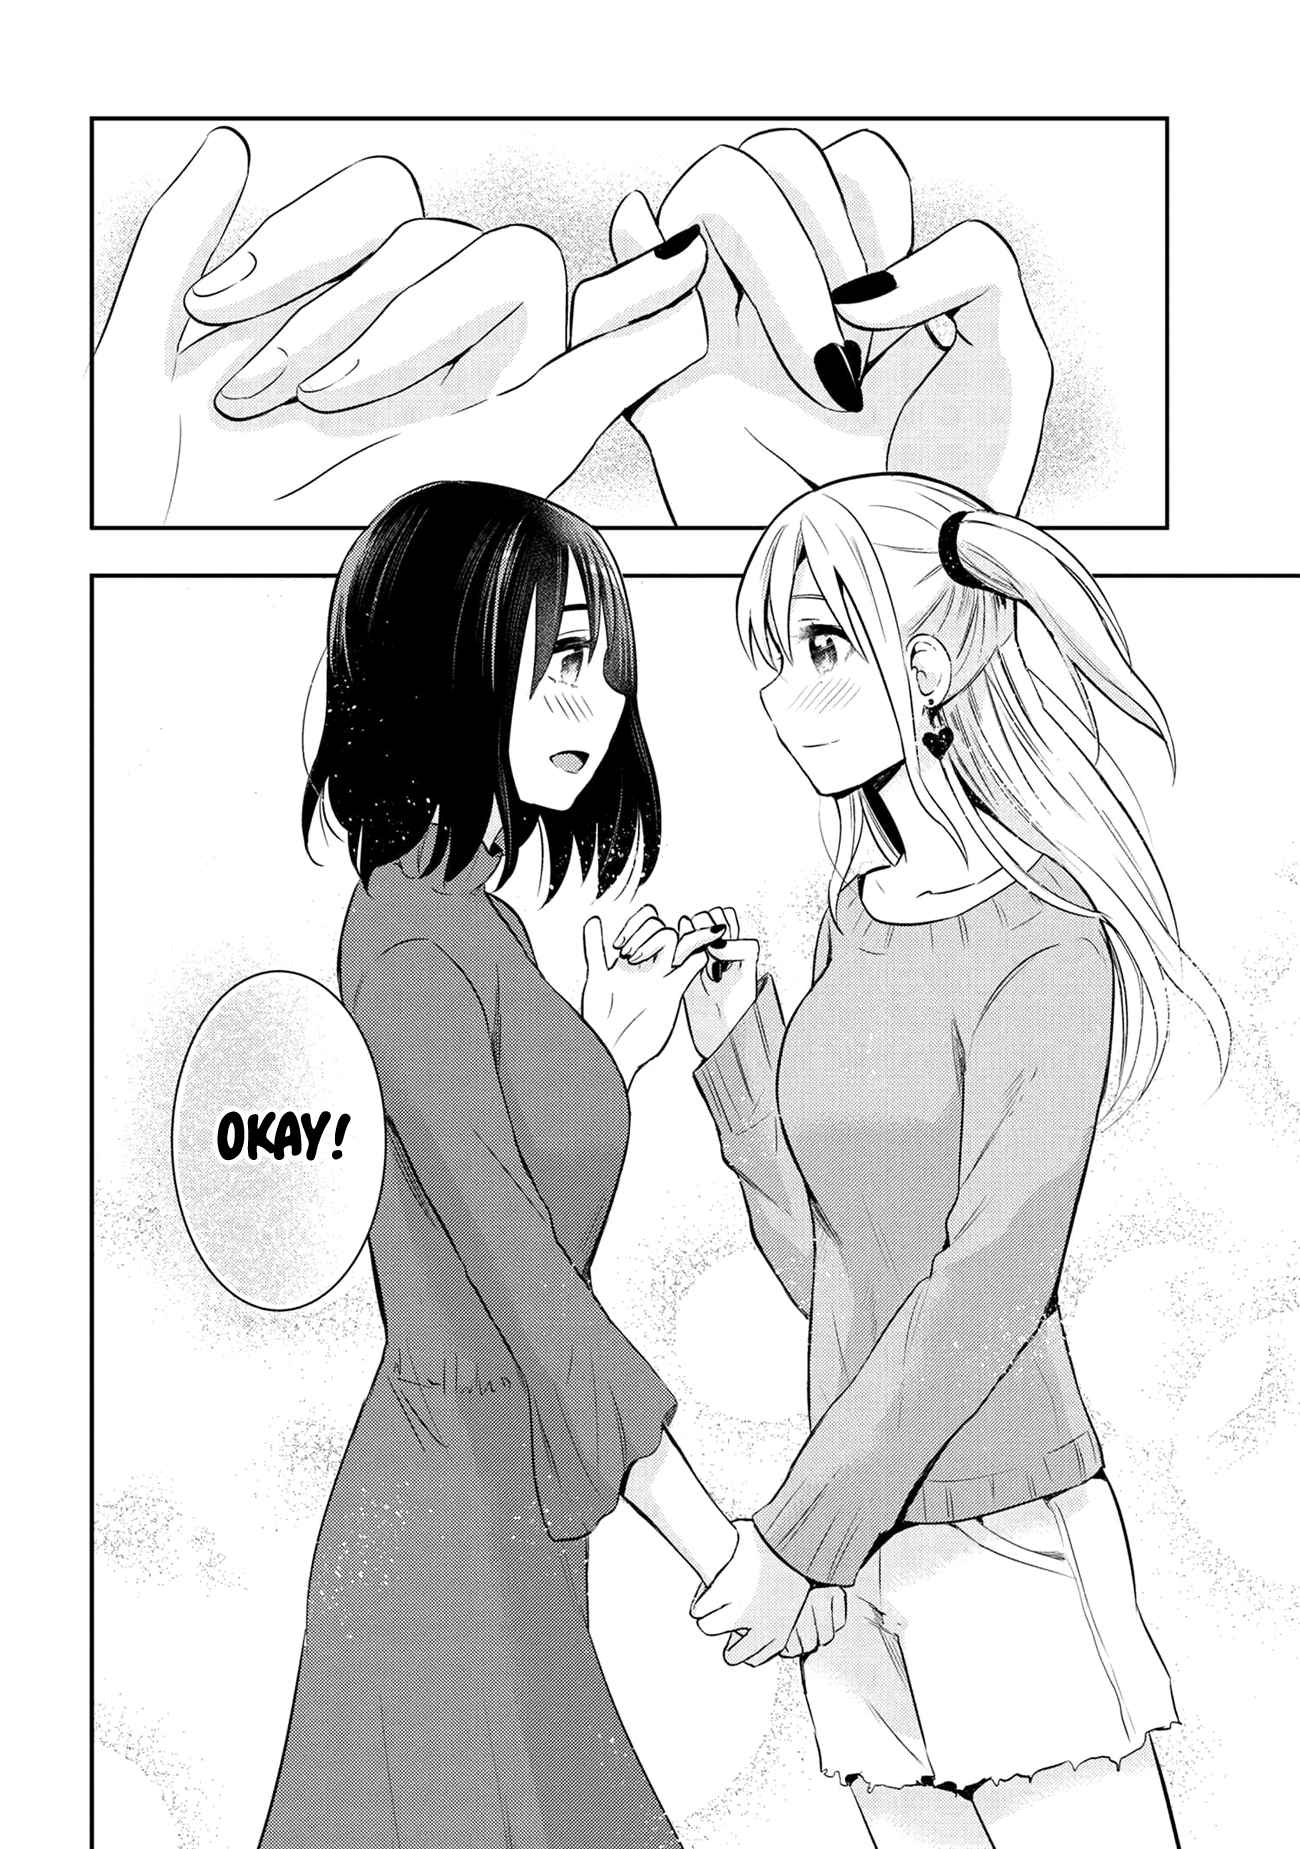 We Can't Draw Love Vol. 2 Ch. 18